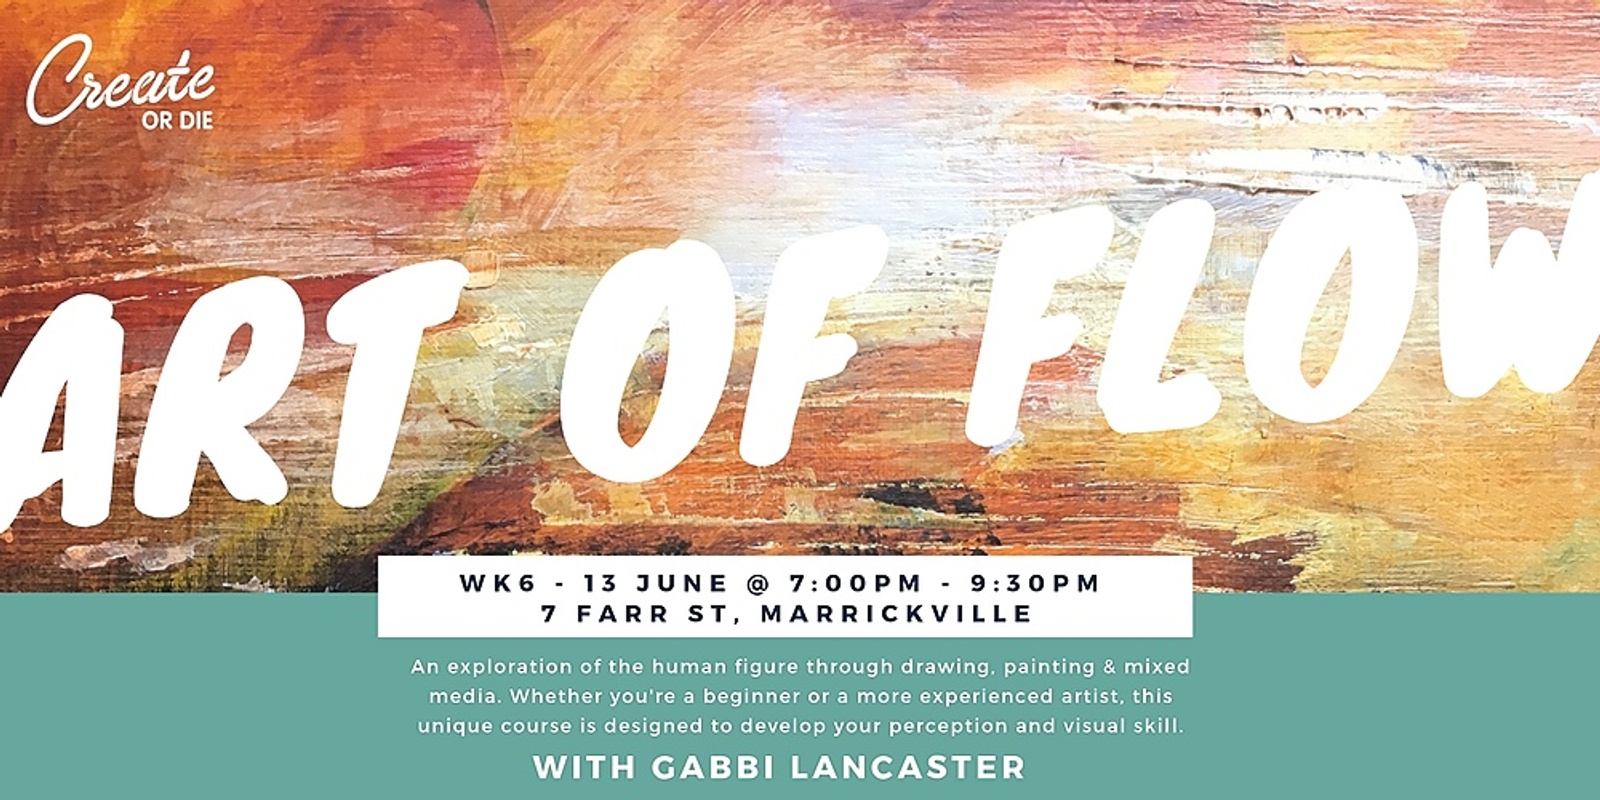 Banner image for The Art of Flow - Wk6 - Explore the human figure through mixed media - June 13 @ 7:00pm